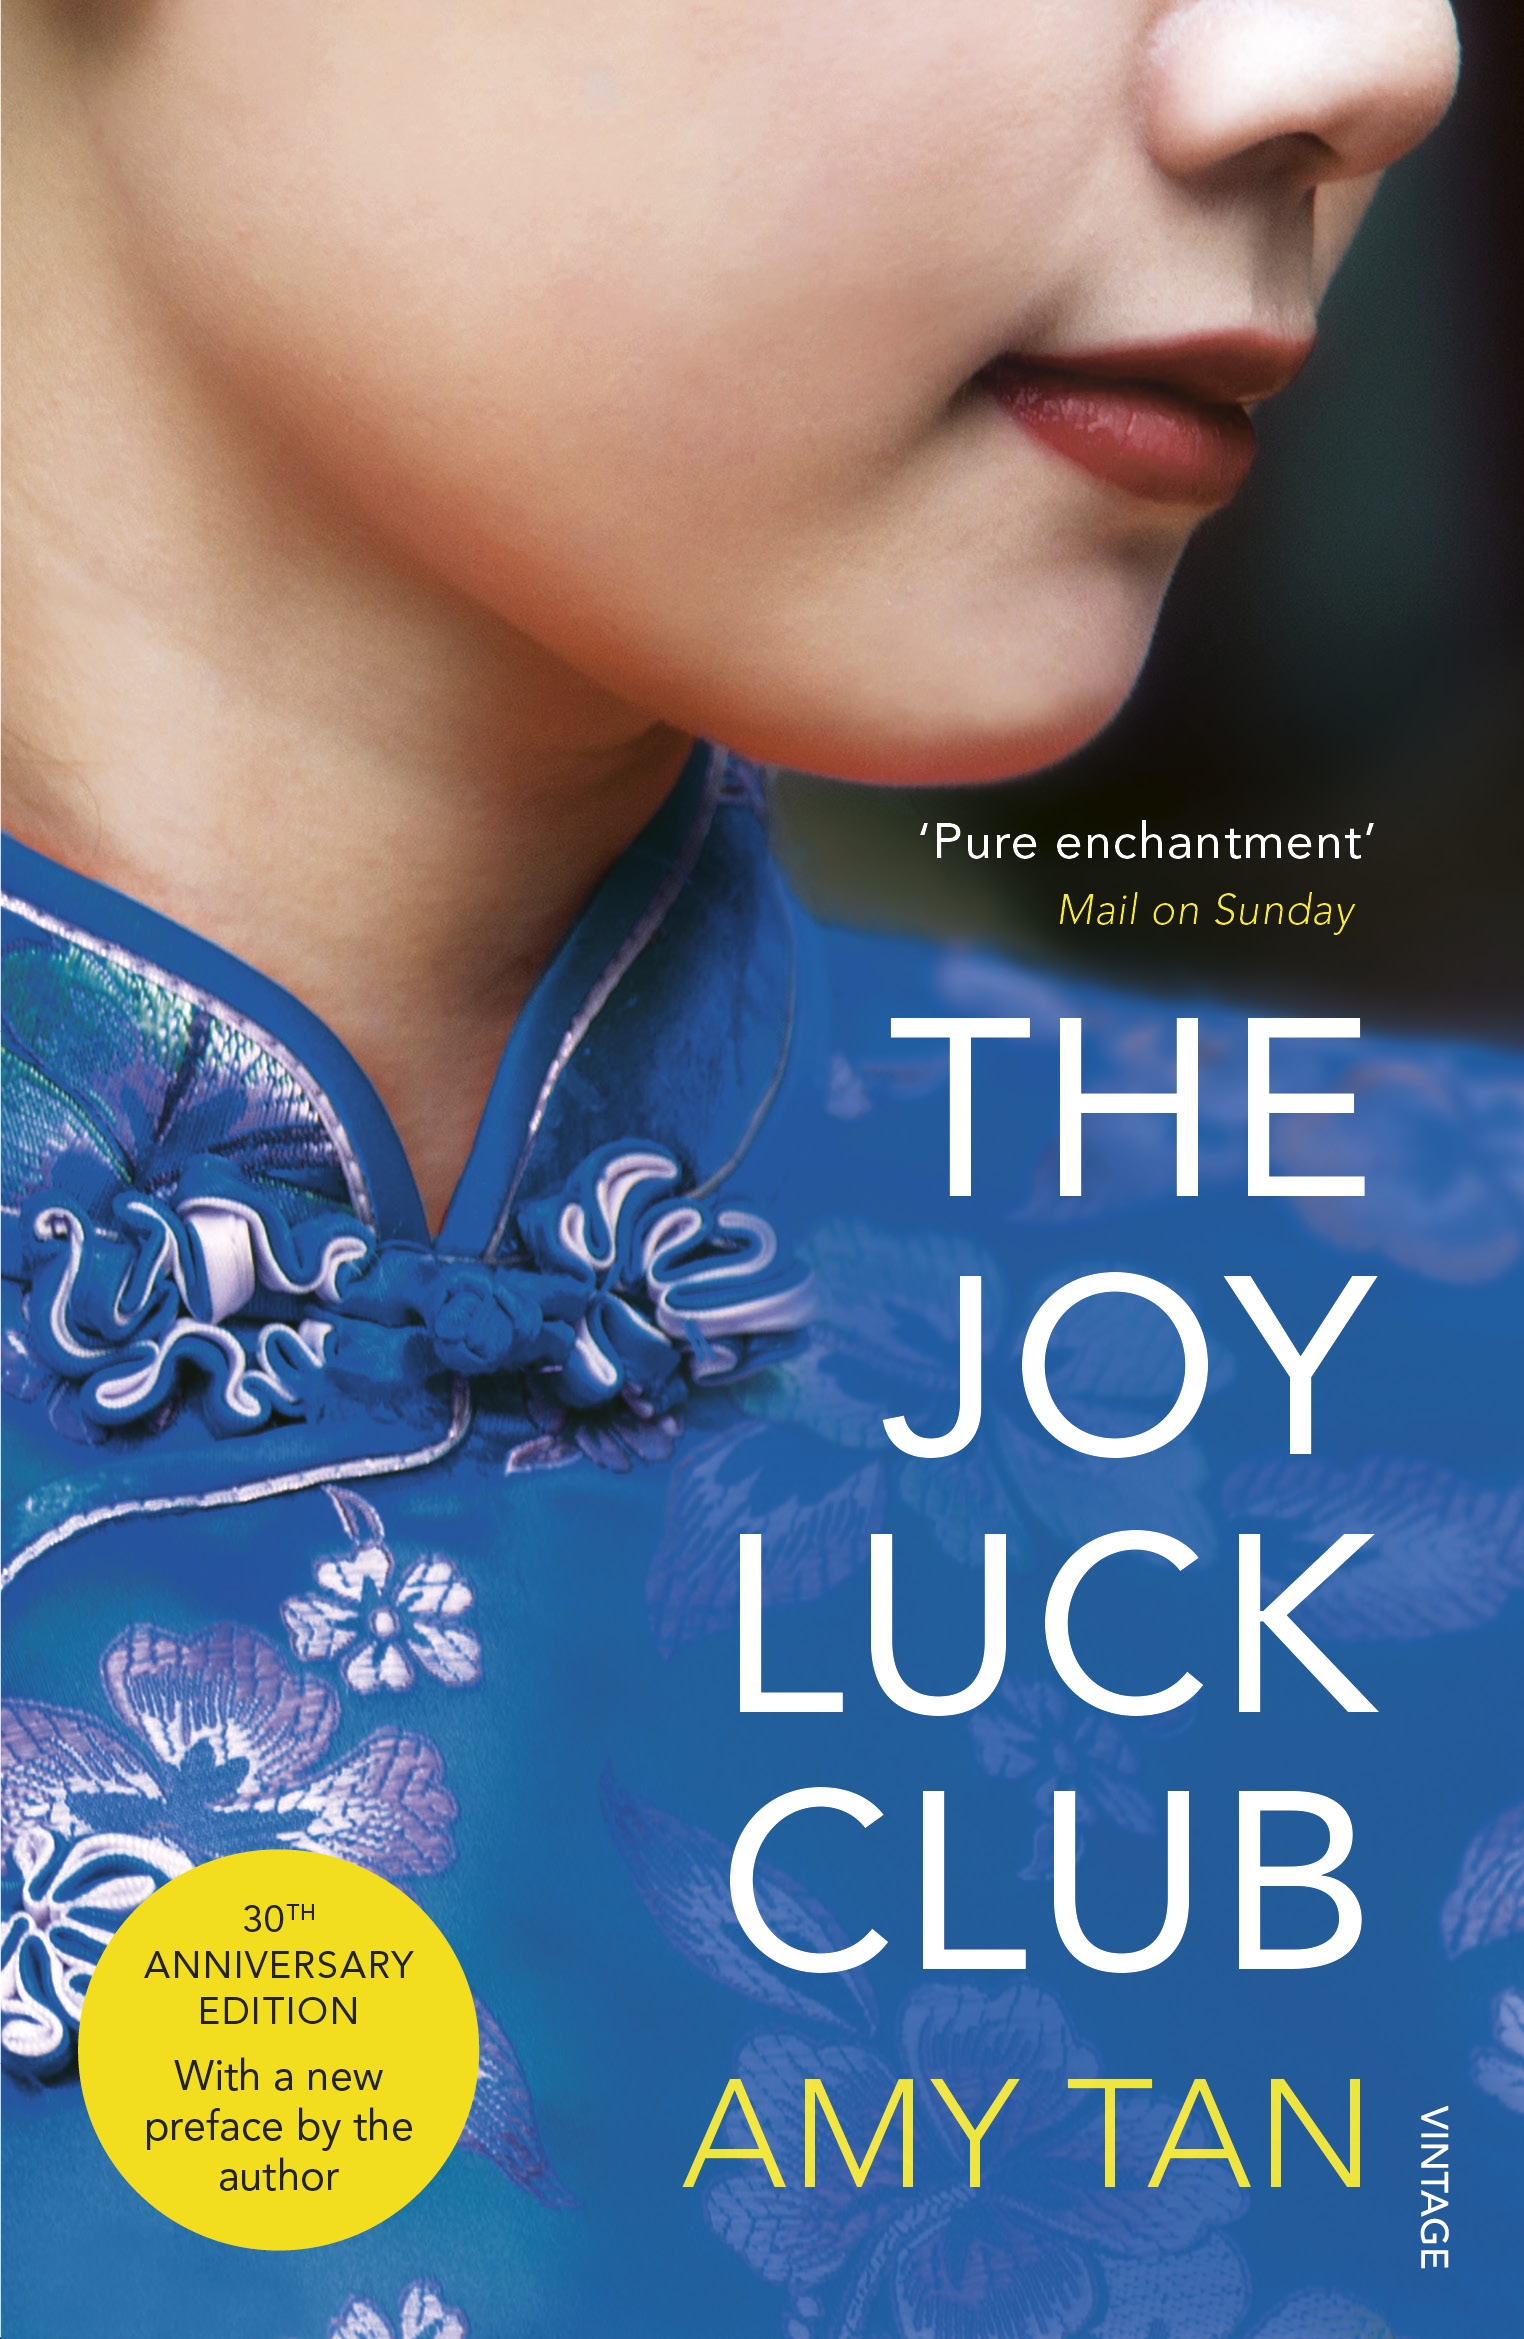 The Joy Luck Club by Amy Tan - Penguin Books New Zealand